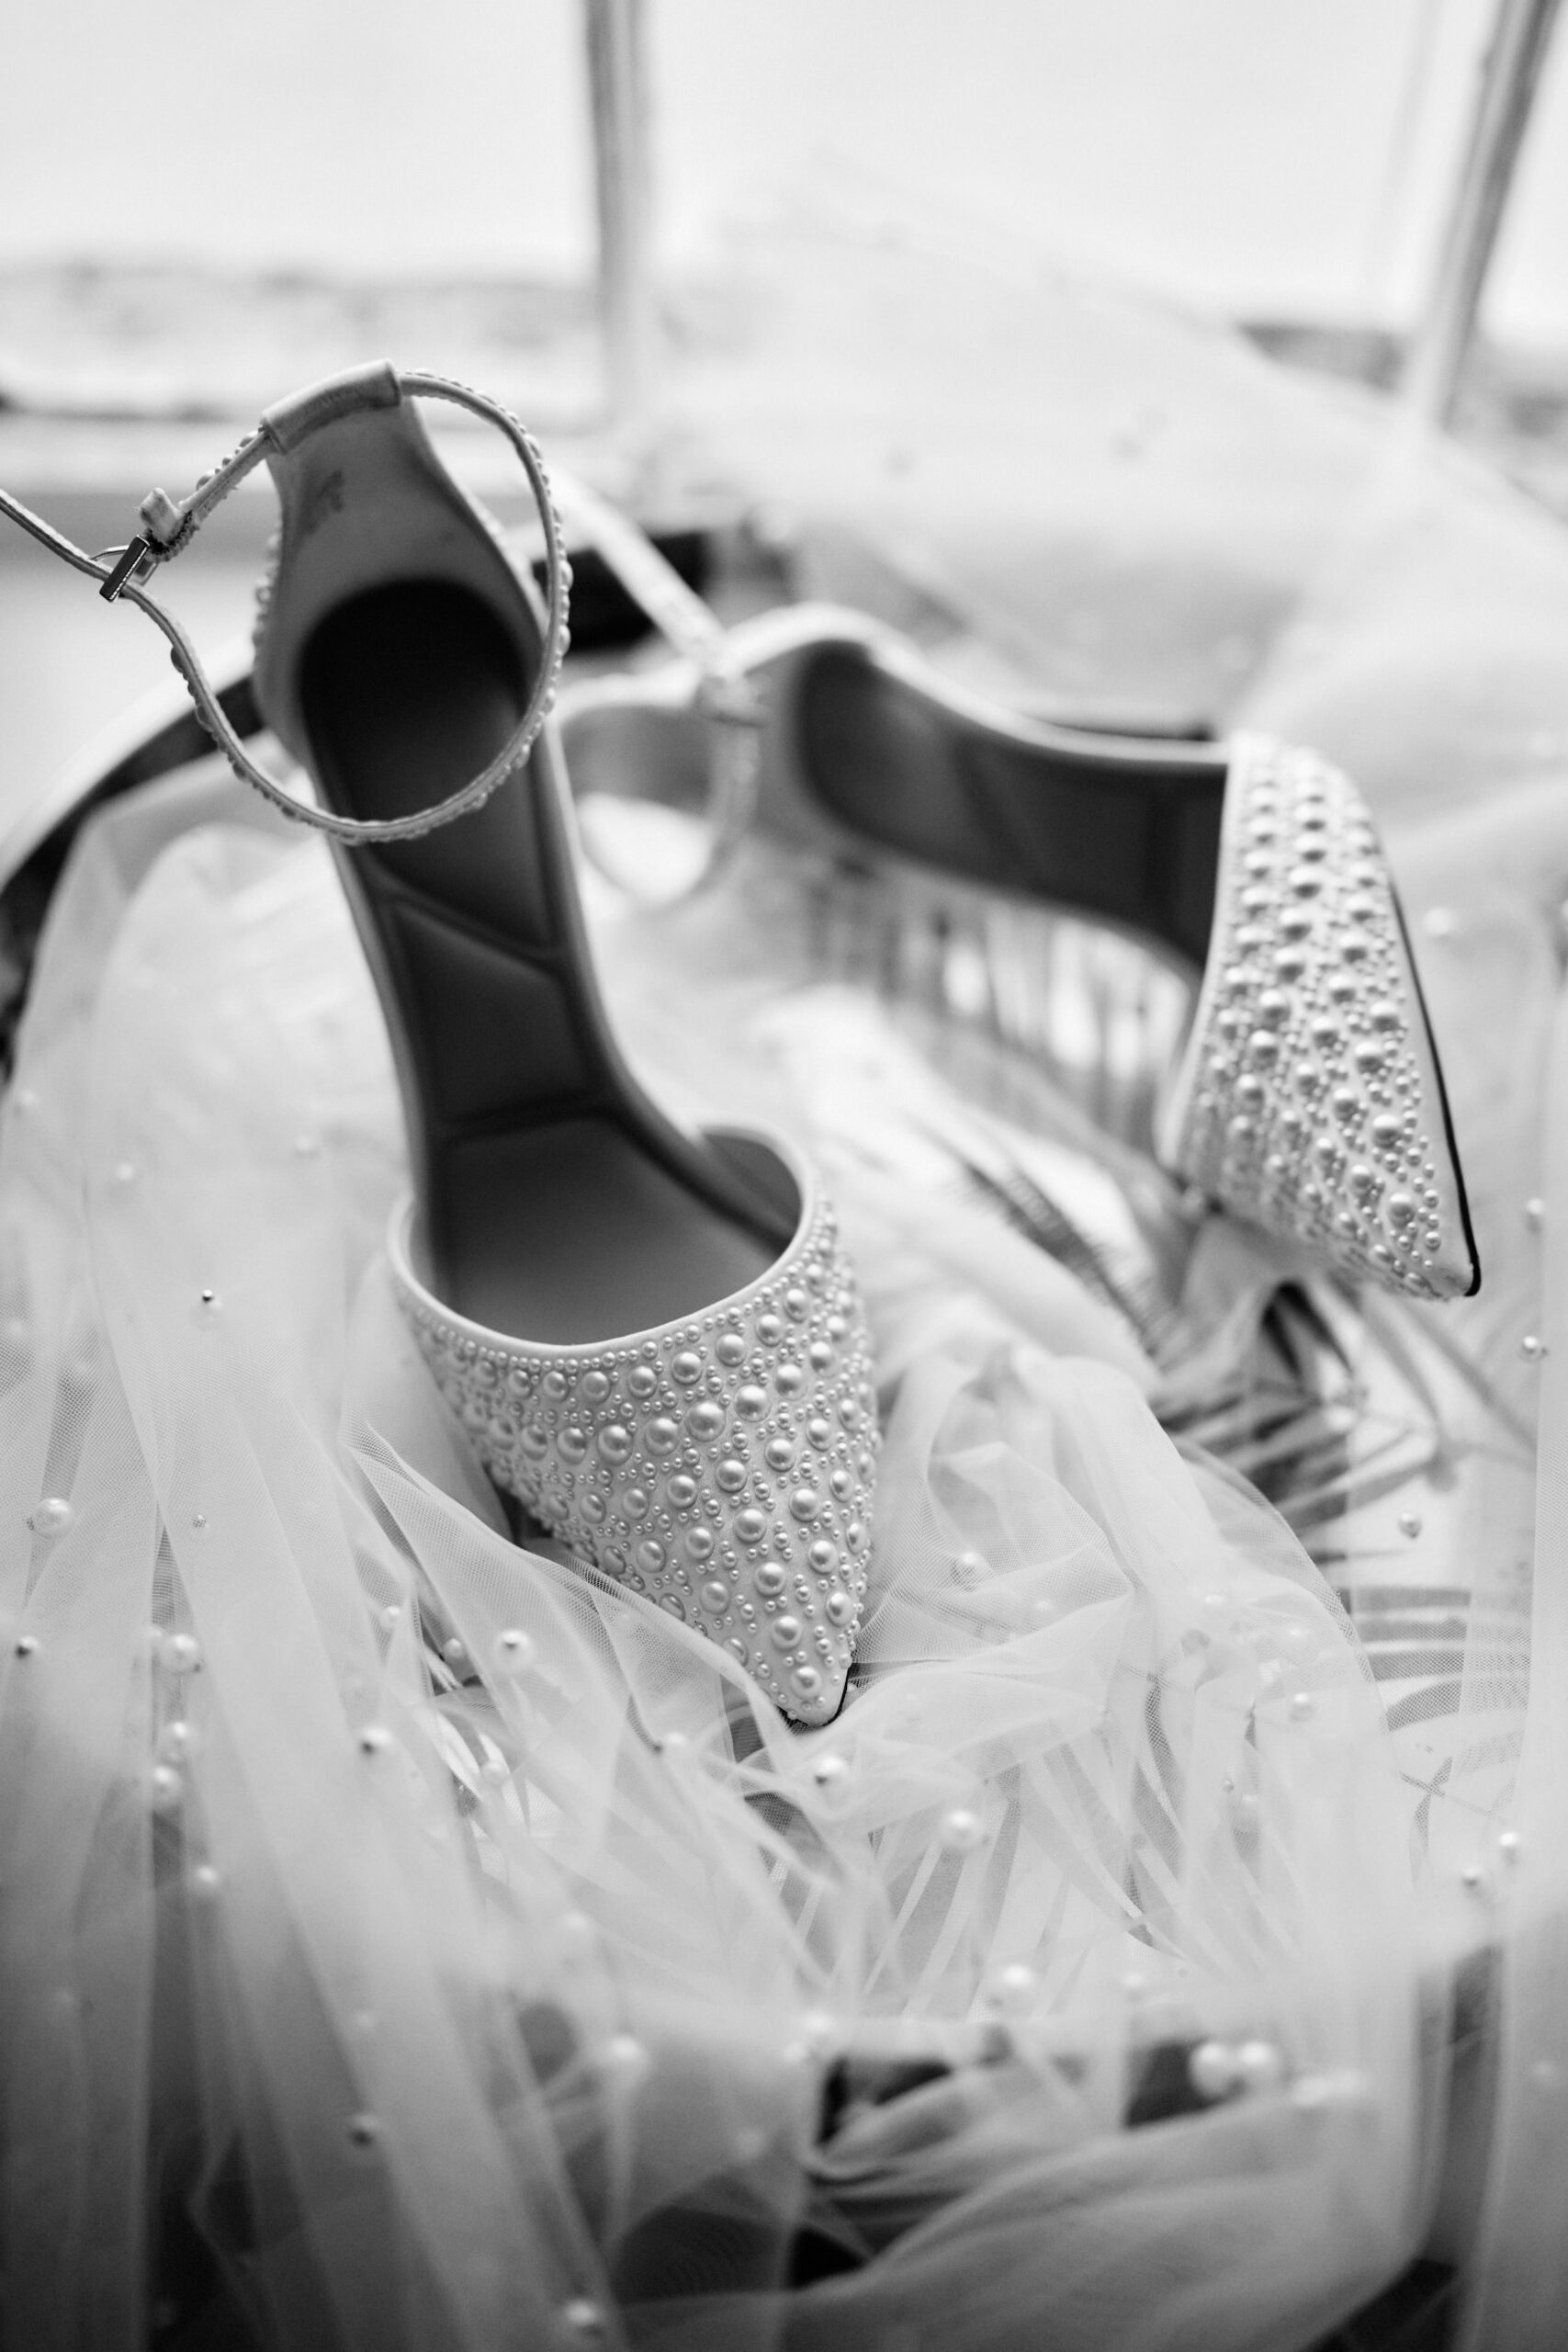 A picture in black and white of a couple's wedding shoes.